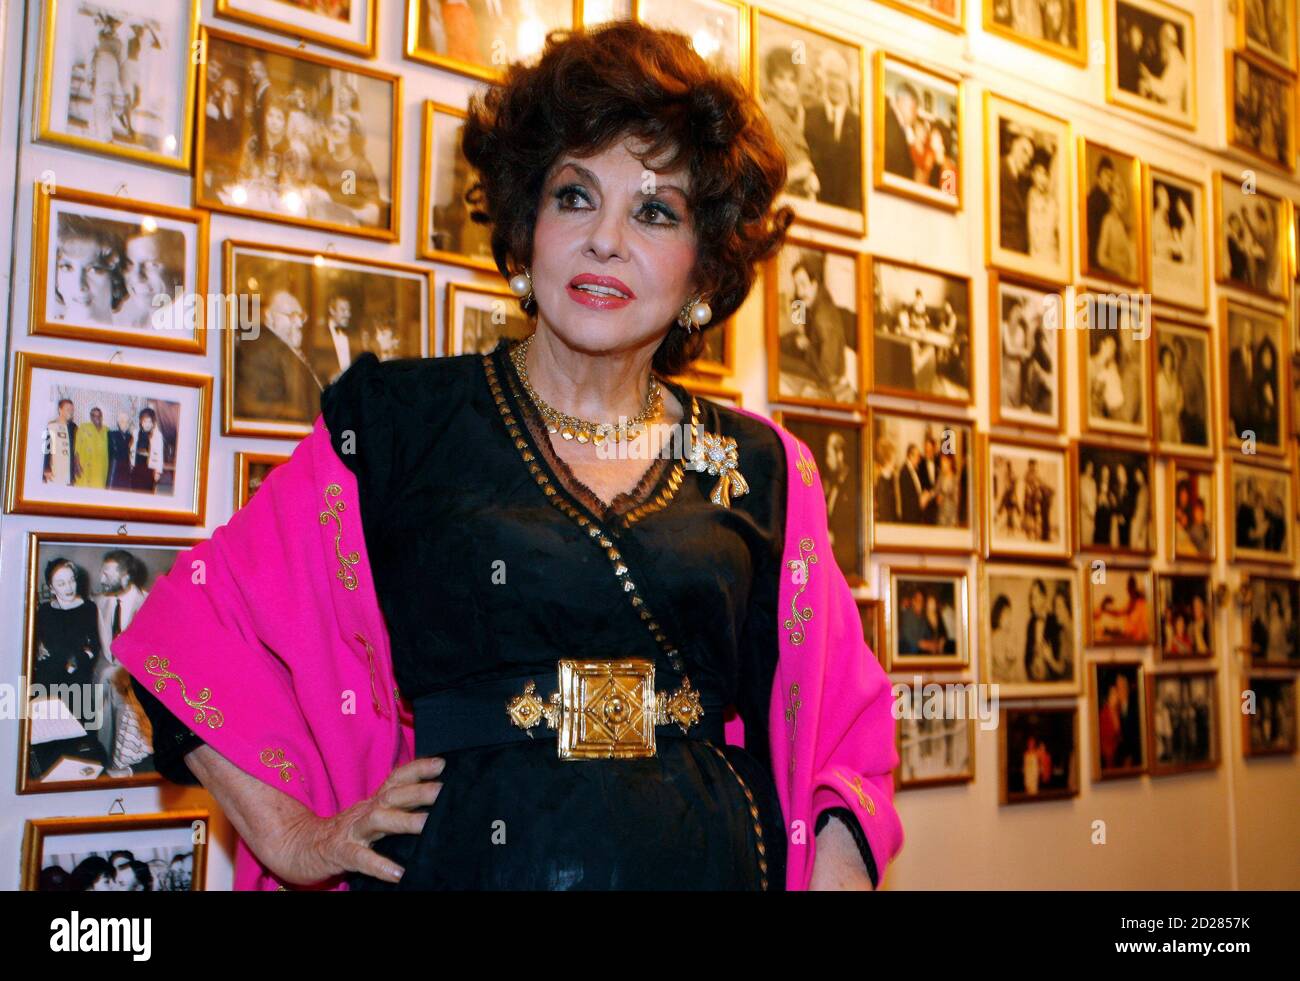 Italian film icon Gina Lollobrigida poses near a wall of celebrity photos in her villa in southern Rome December 7, 2006. Lollobrigida vowed on Thursday to make the media pay for ruining her plans to marry Javier Rigau, a Spaniard 34 years her junior. In an interview with Reuters after she arrived in Rome from Philadelphia, the 79-year-old film star said the couple had called off their wedding plans after Rigau was worn down by 'endless attacks, slander and violence' from the media.    REUTERS/Chris Helgren   (ITALY) Stock Photo